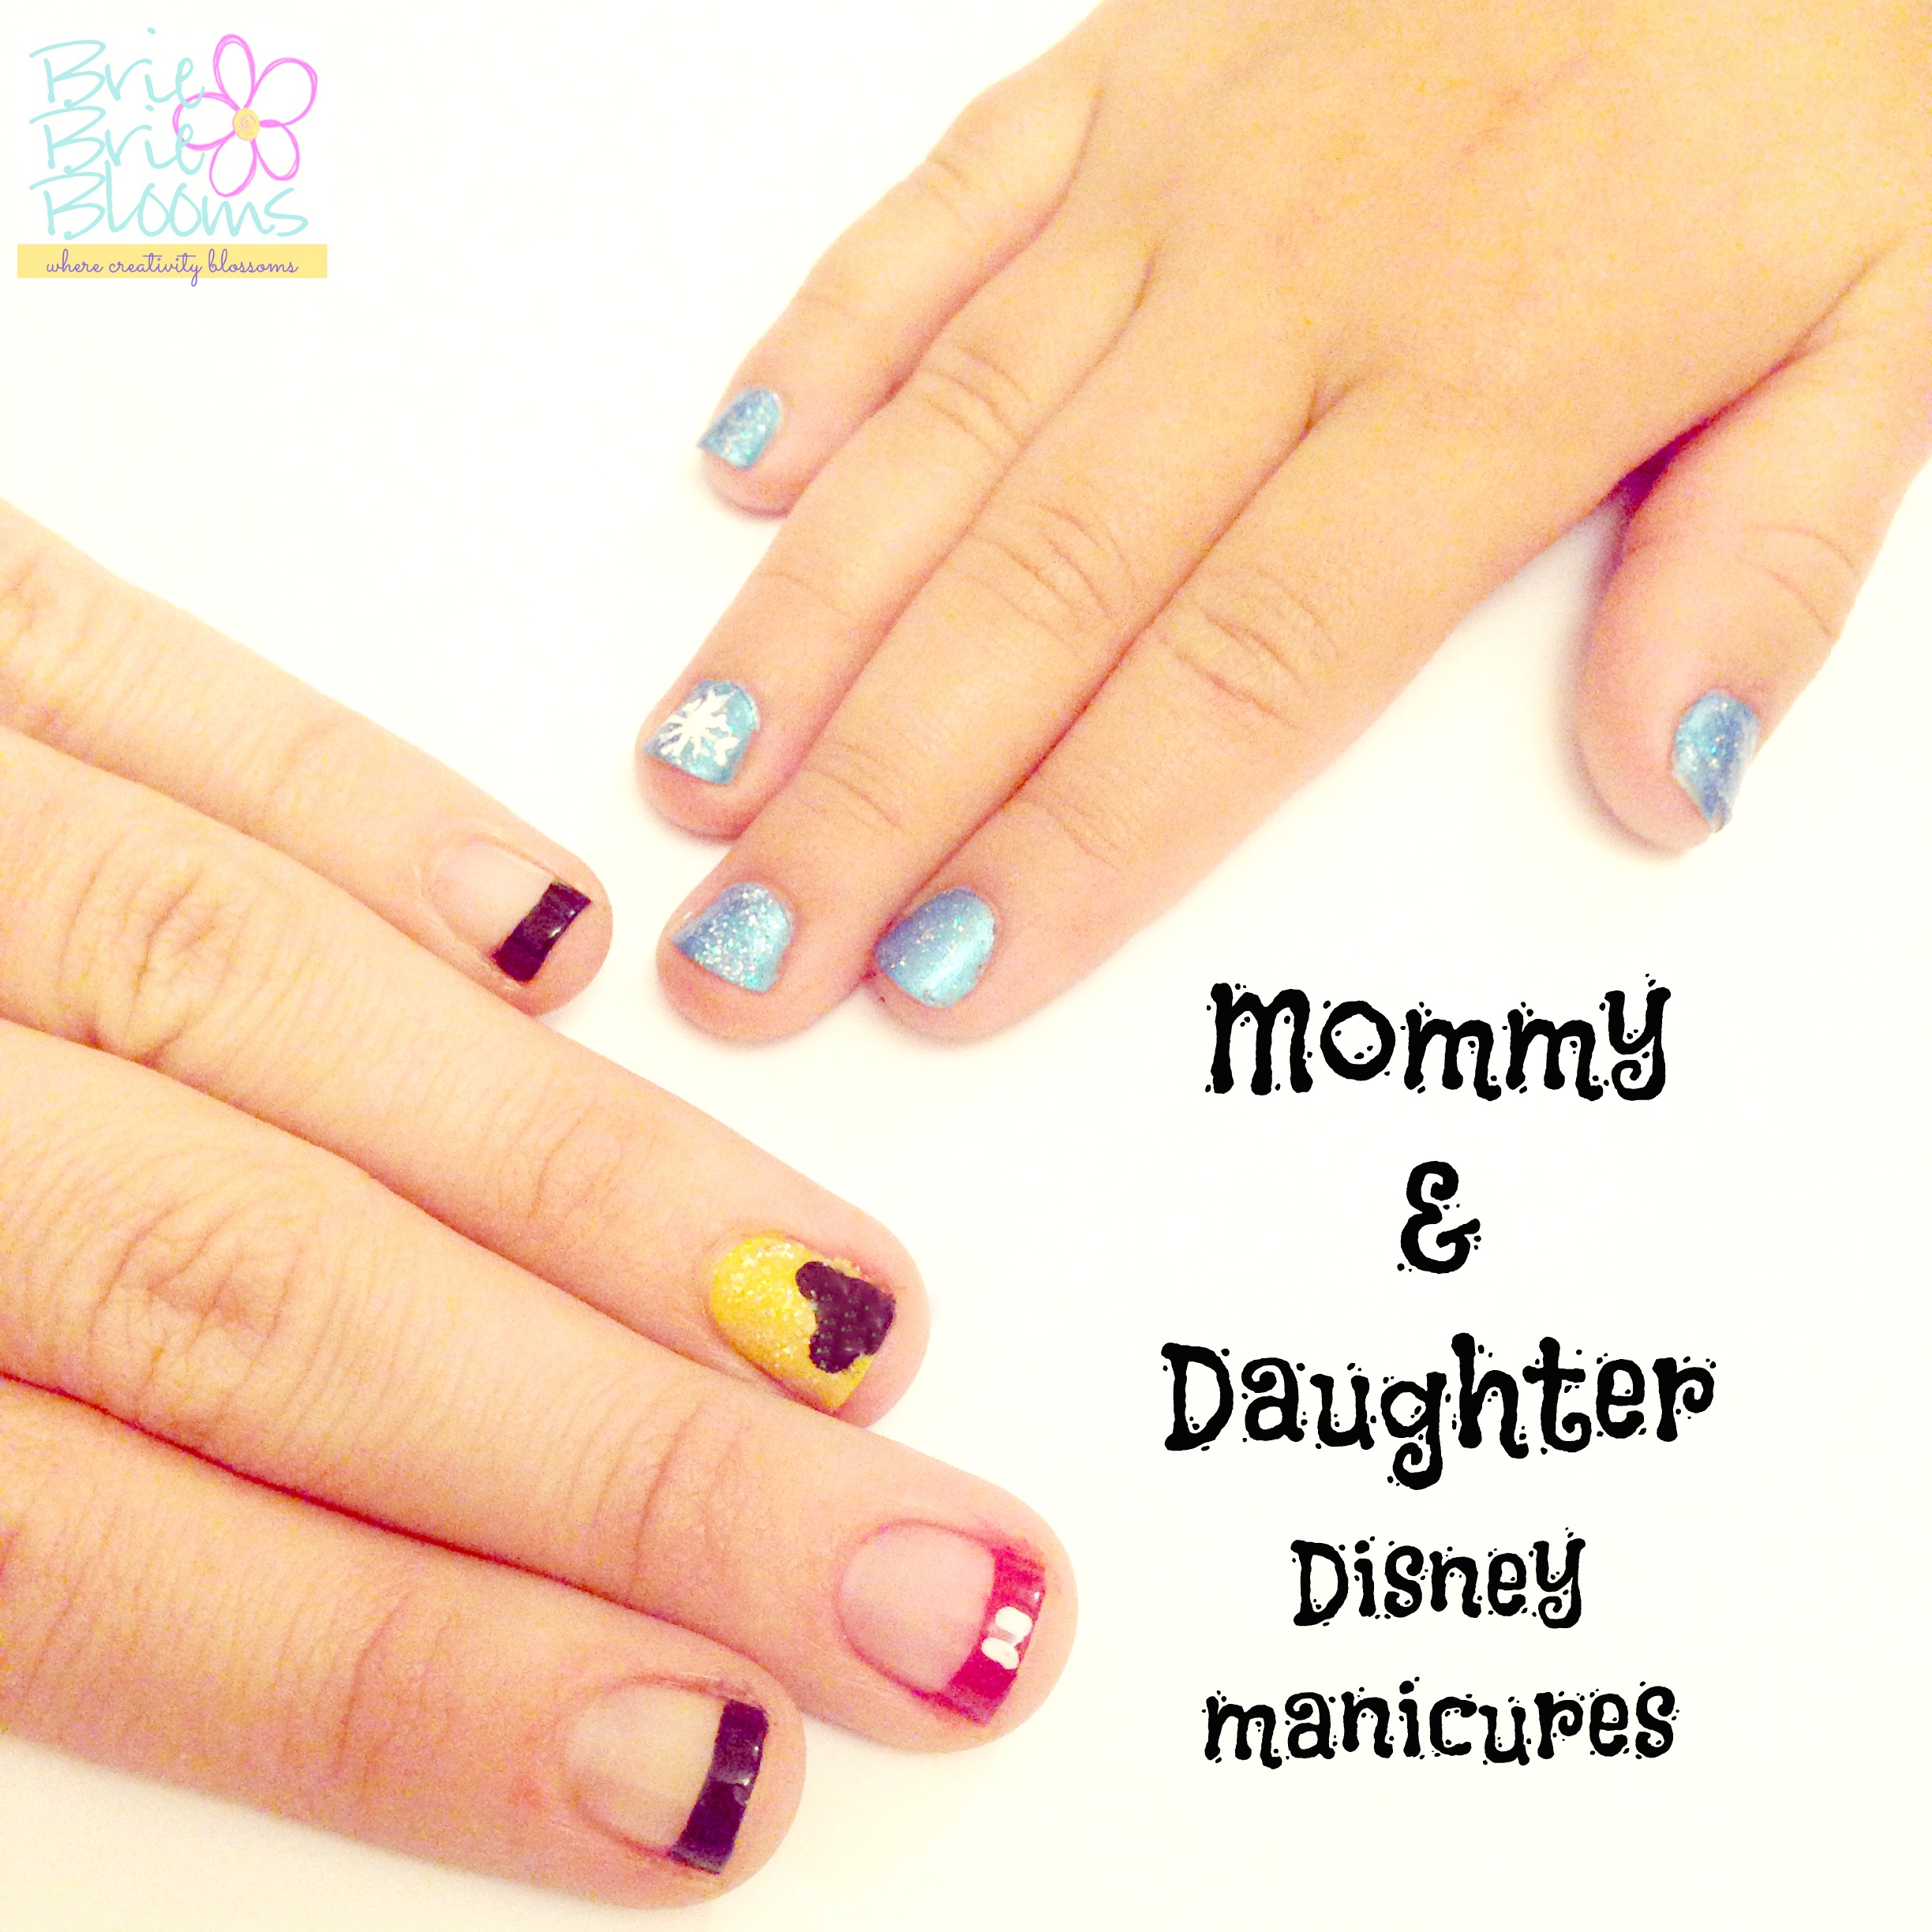 Mommy and Daughter Disney manicures